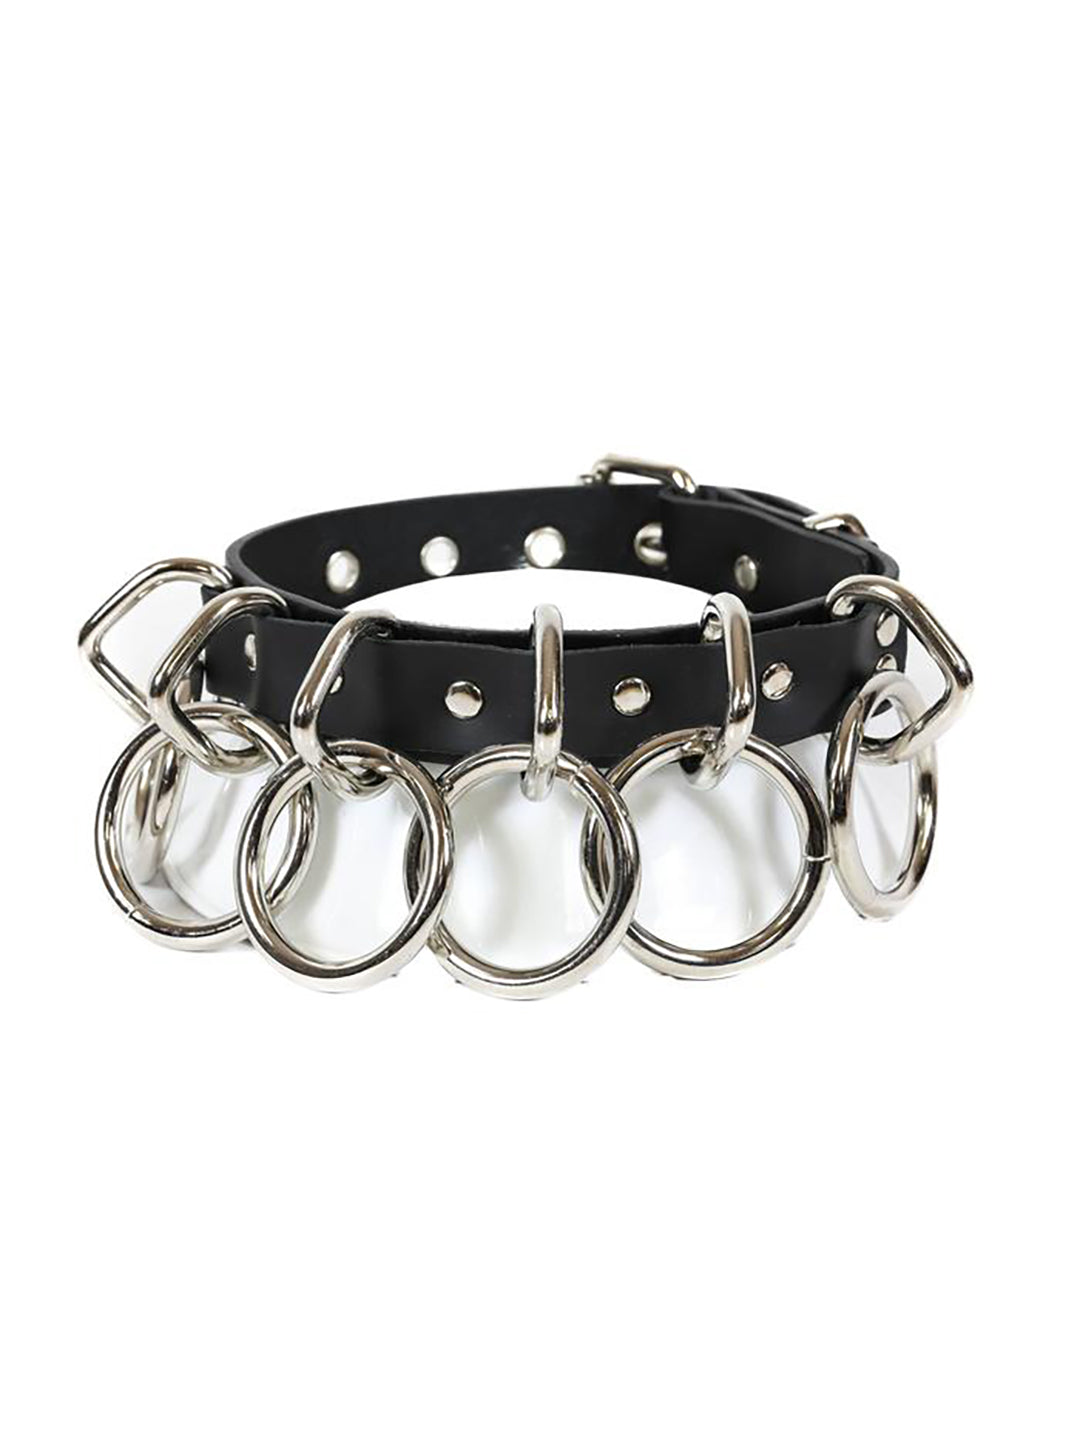 Leather Collar With 6 Rings